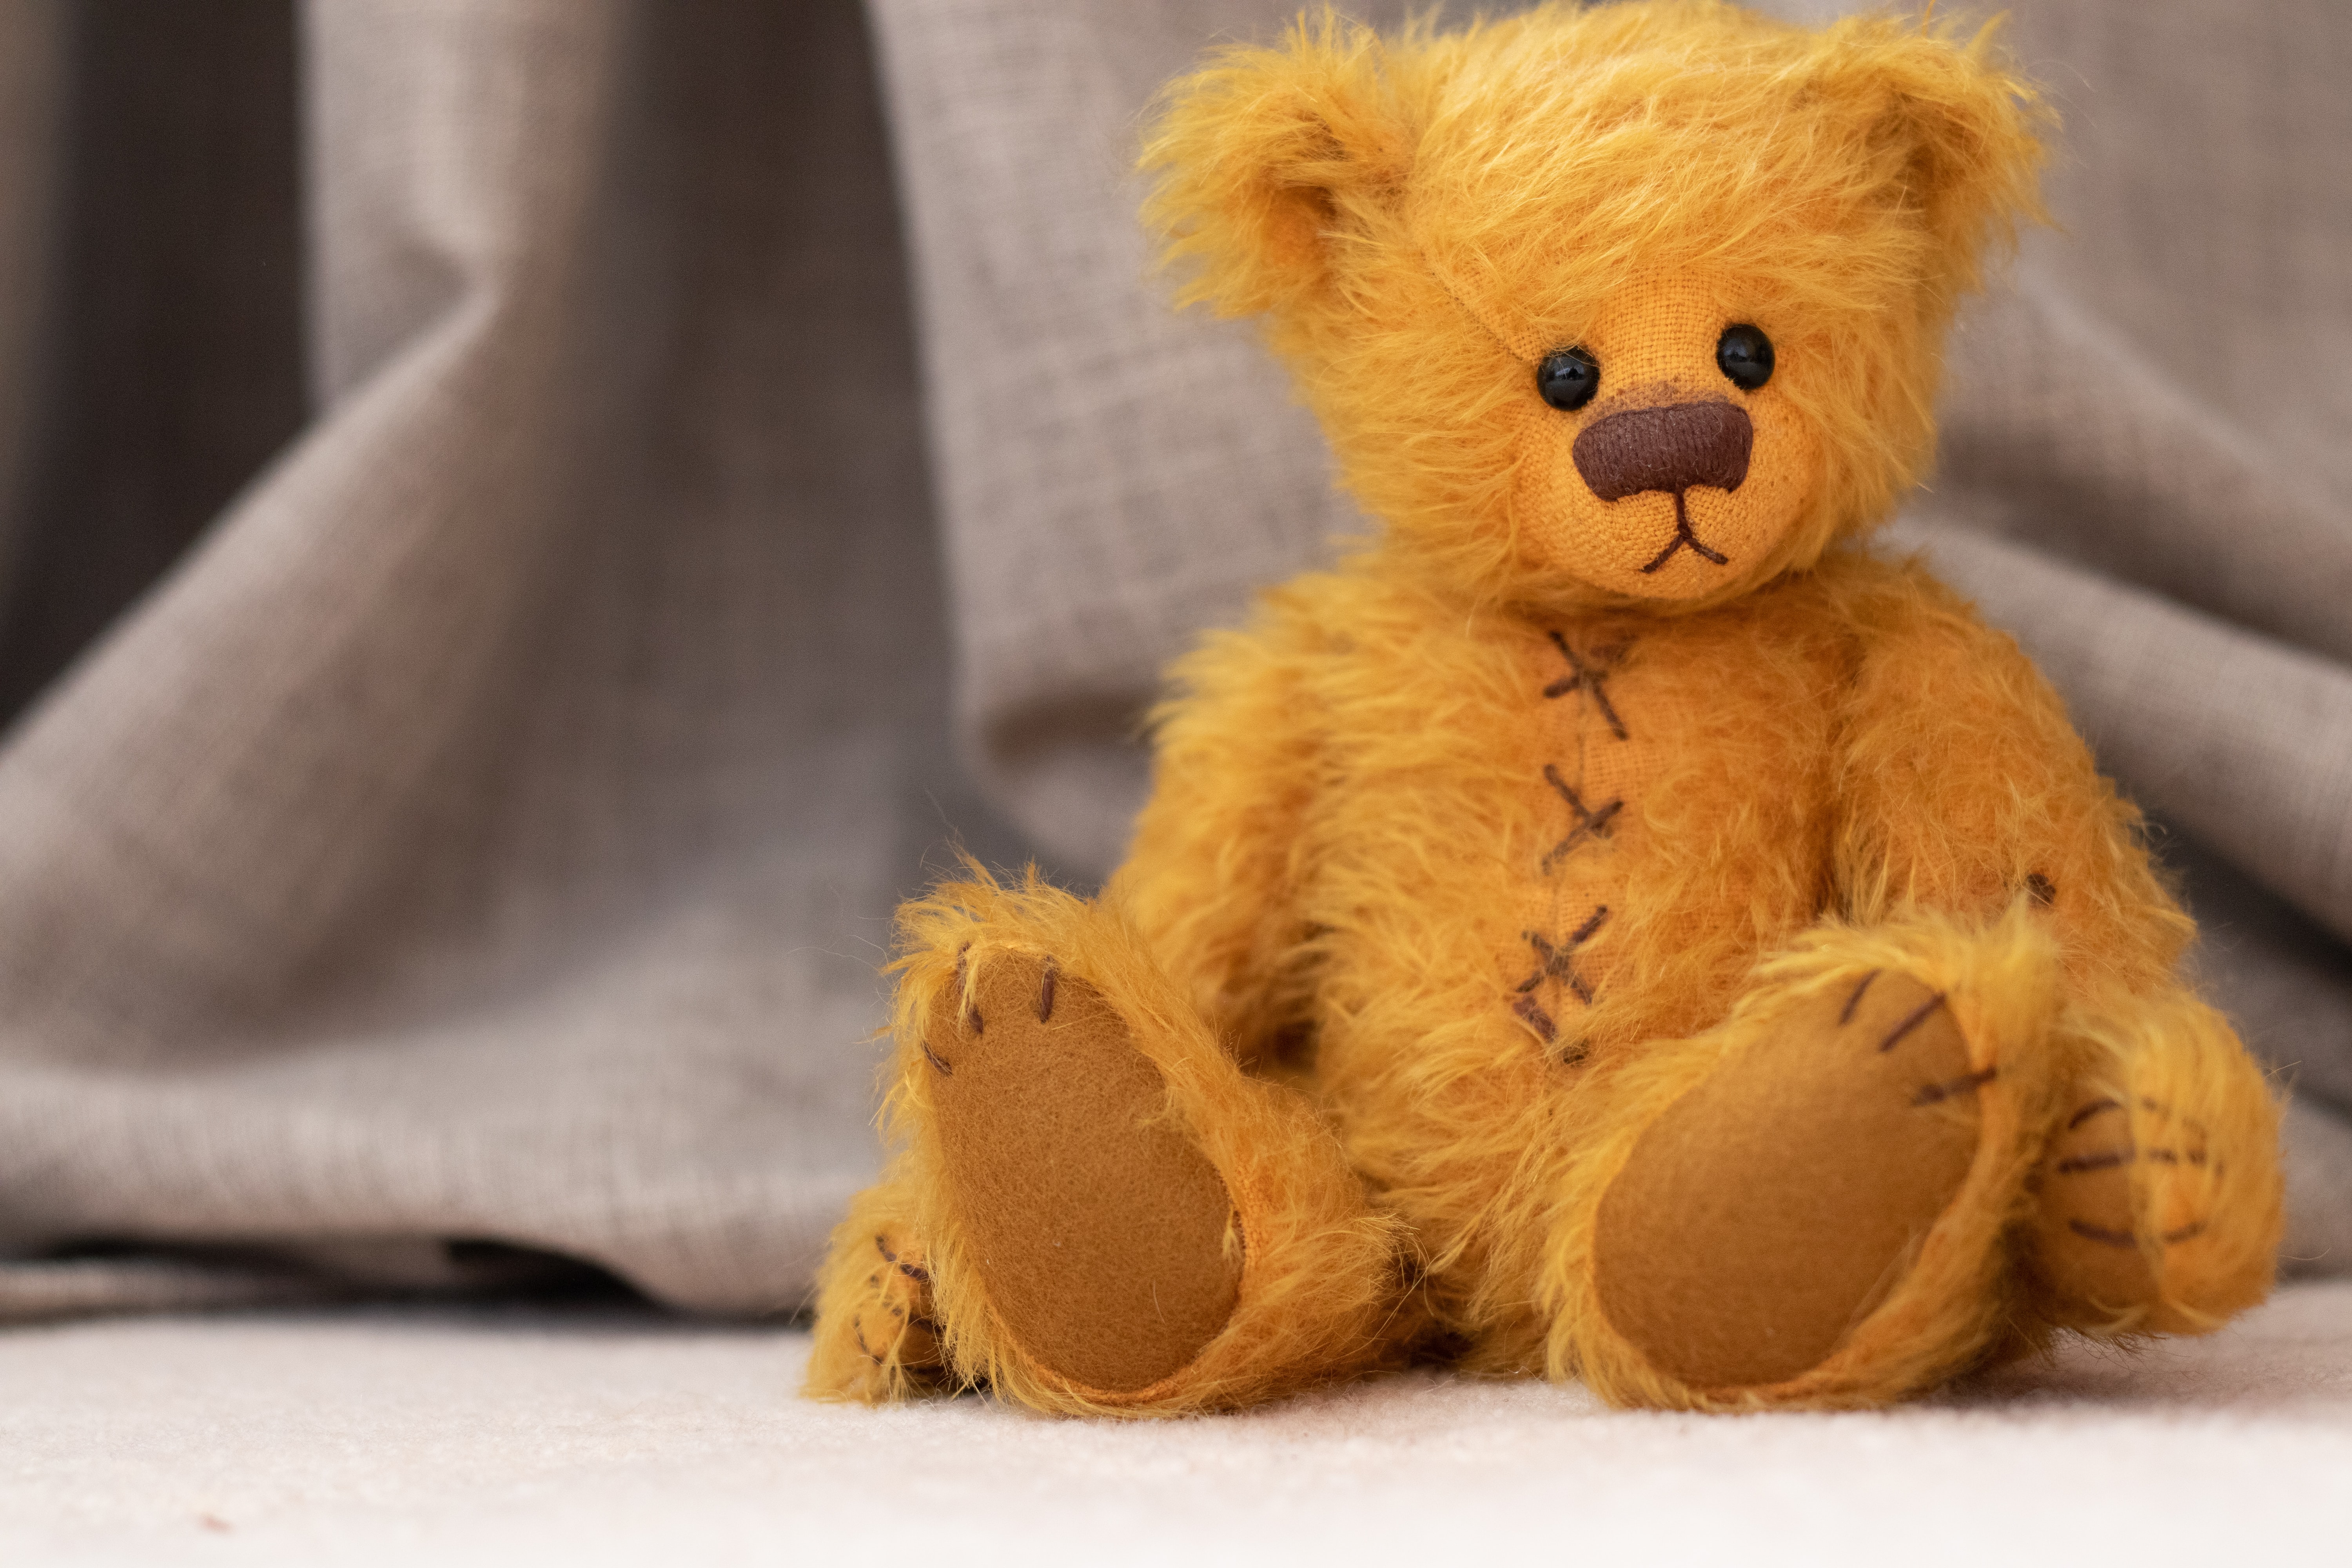 Cute teddy bear with brown stitching.